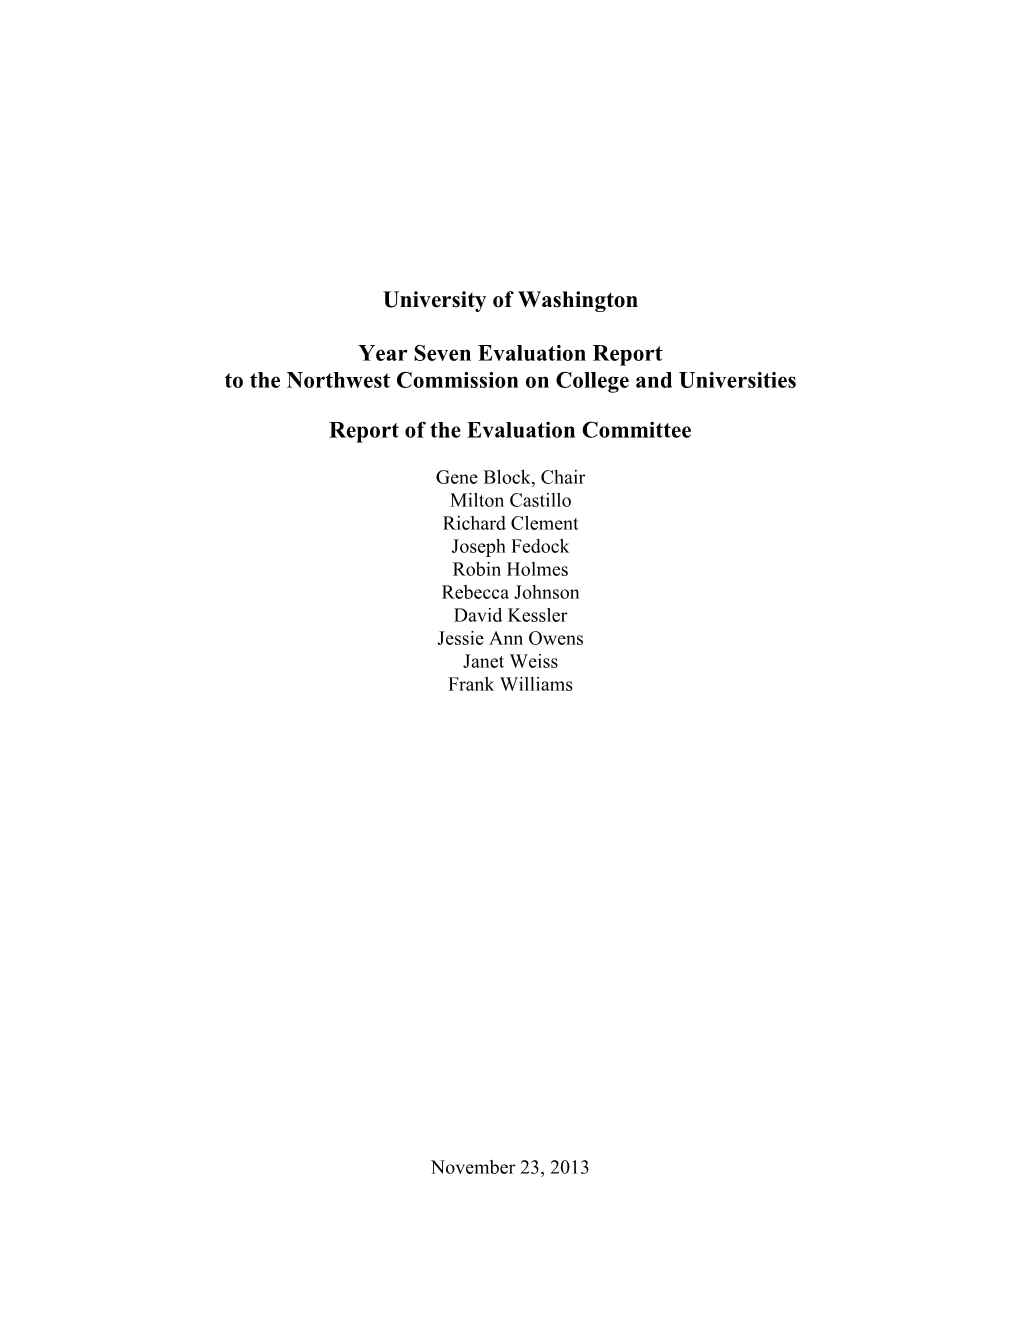 Year Seven Evaluation Report to the Northwest Commission on College and Universities